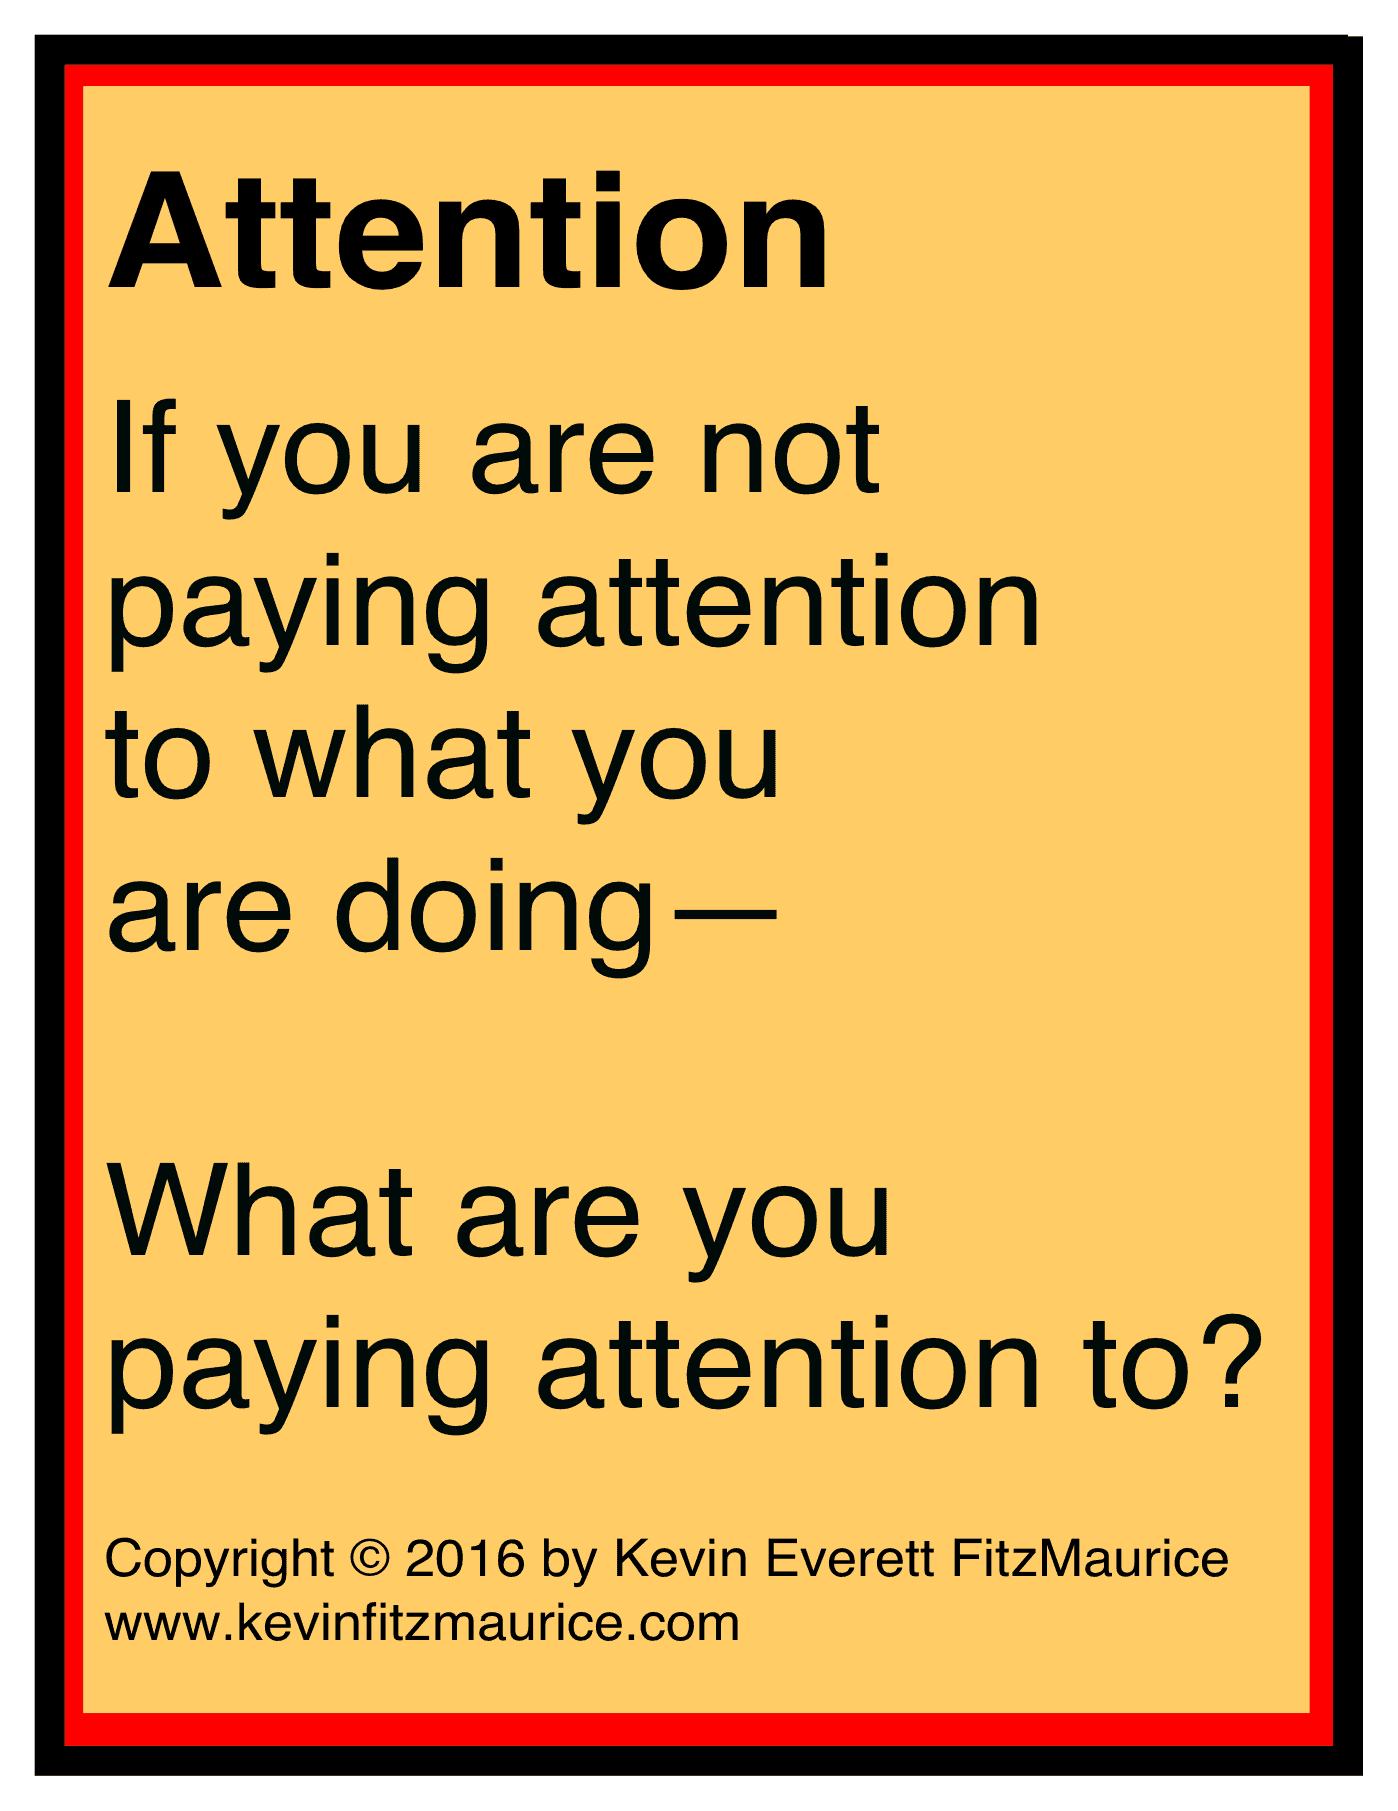 pay attention now